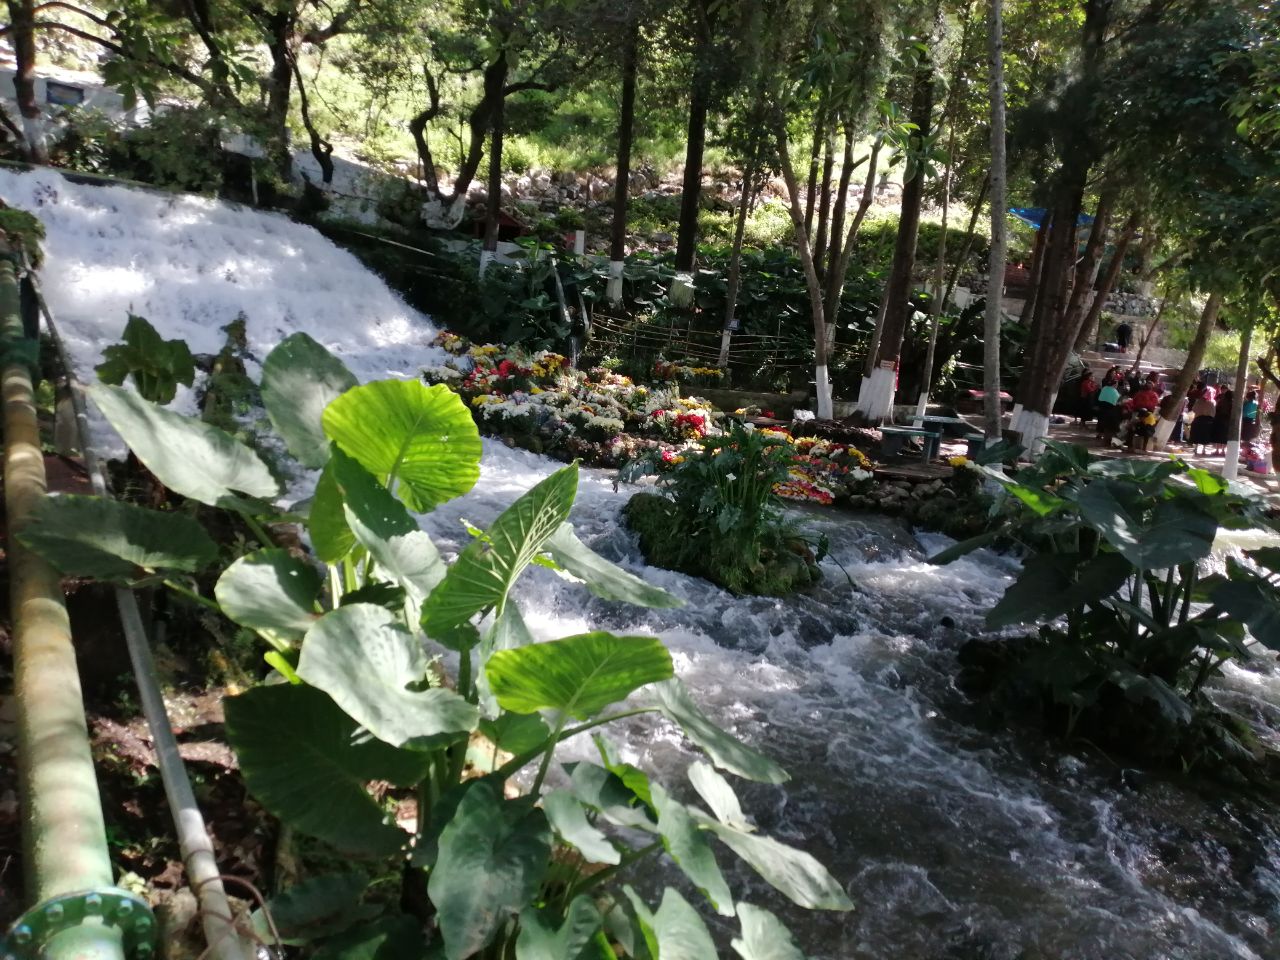 in the image there is a river that carries a lot of strength because you can see the white foam. It is surrounded by trees and plants and in the background there are floral arrangements dedicated to this river.